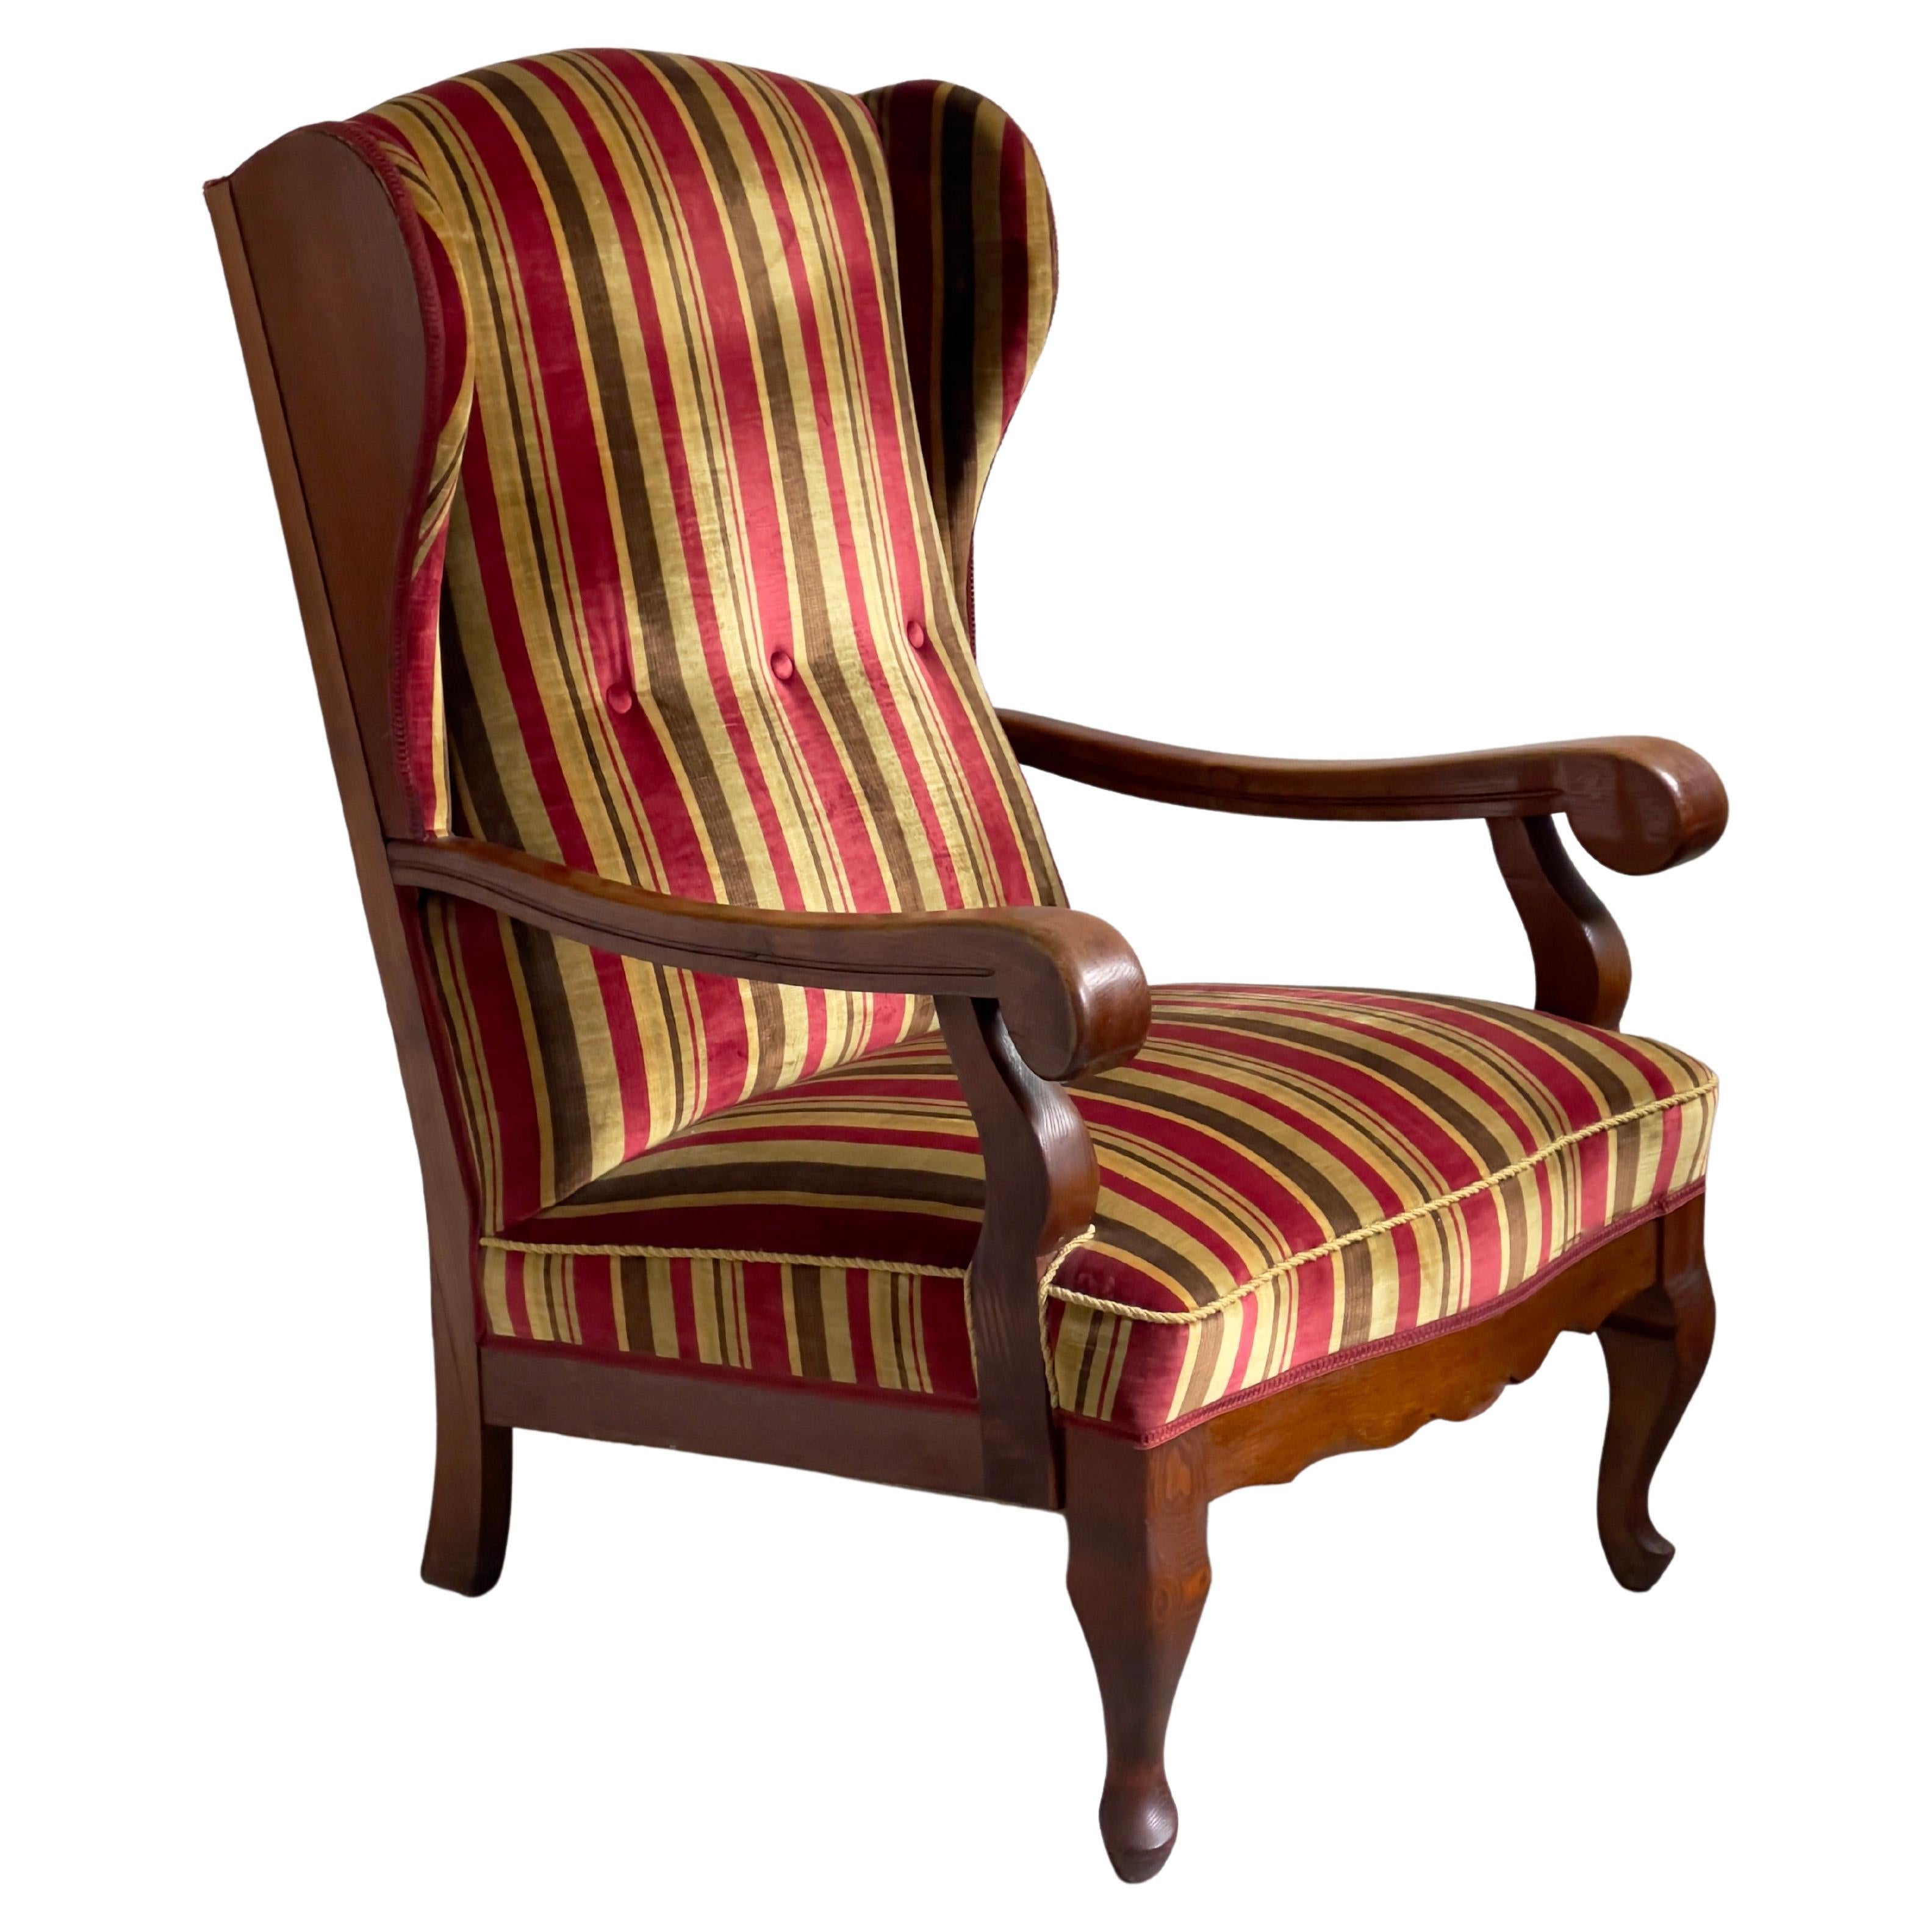 1930s Danish Modern Lounge Chair in Solid Oak and Striped Velvet Upholstery  For Sale